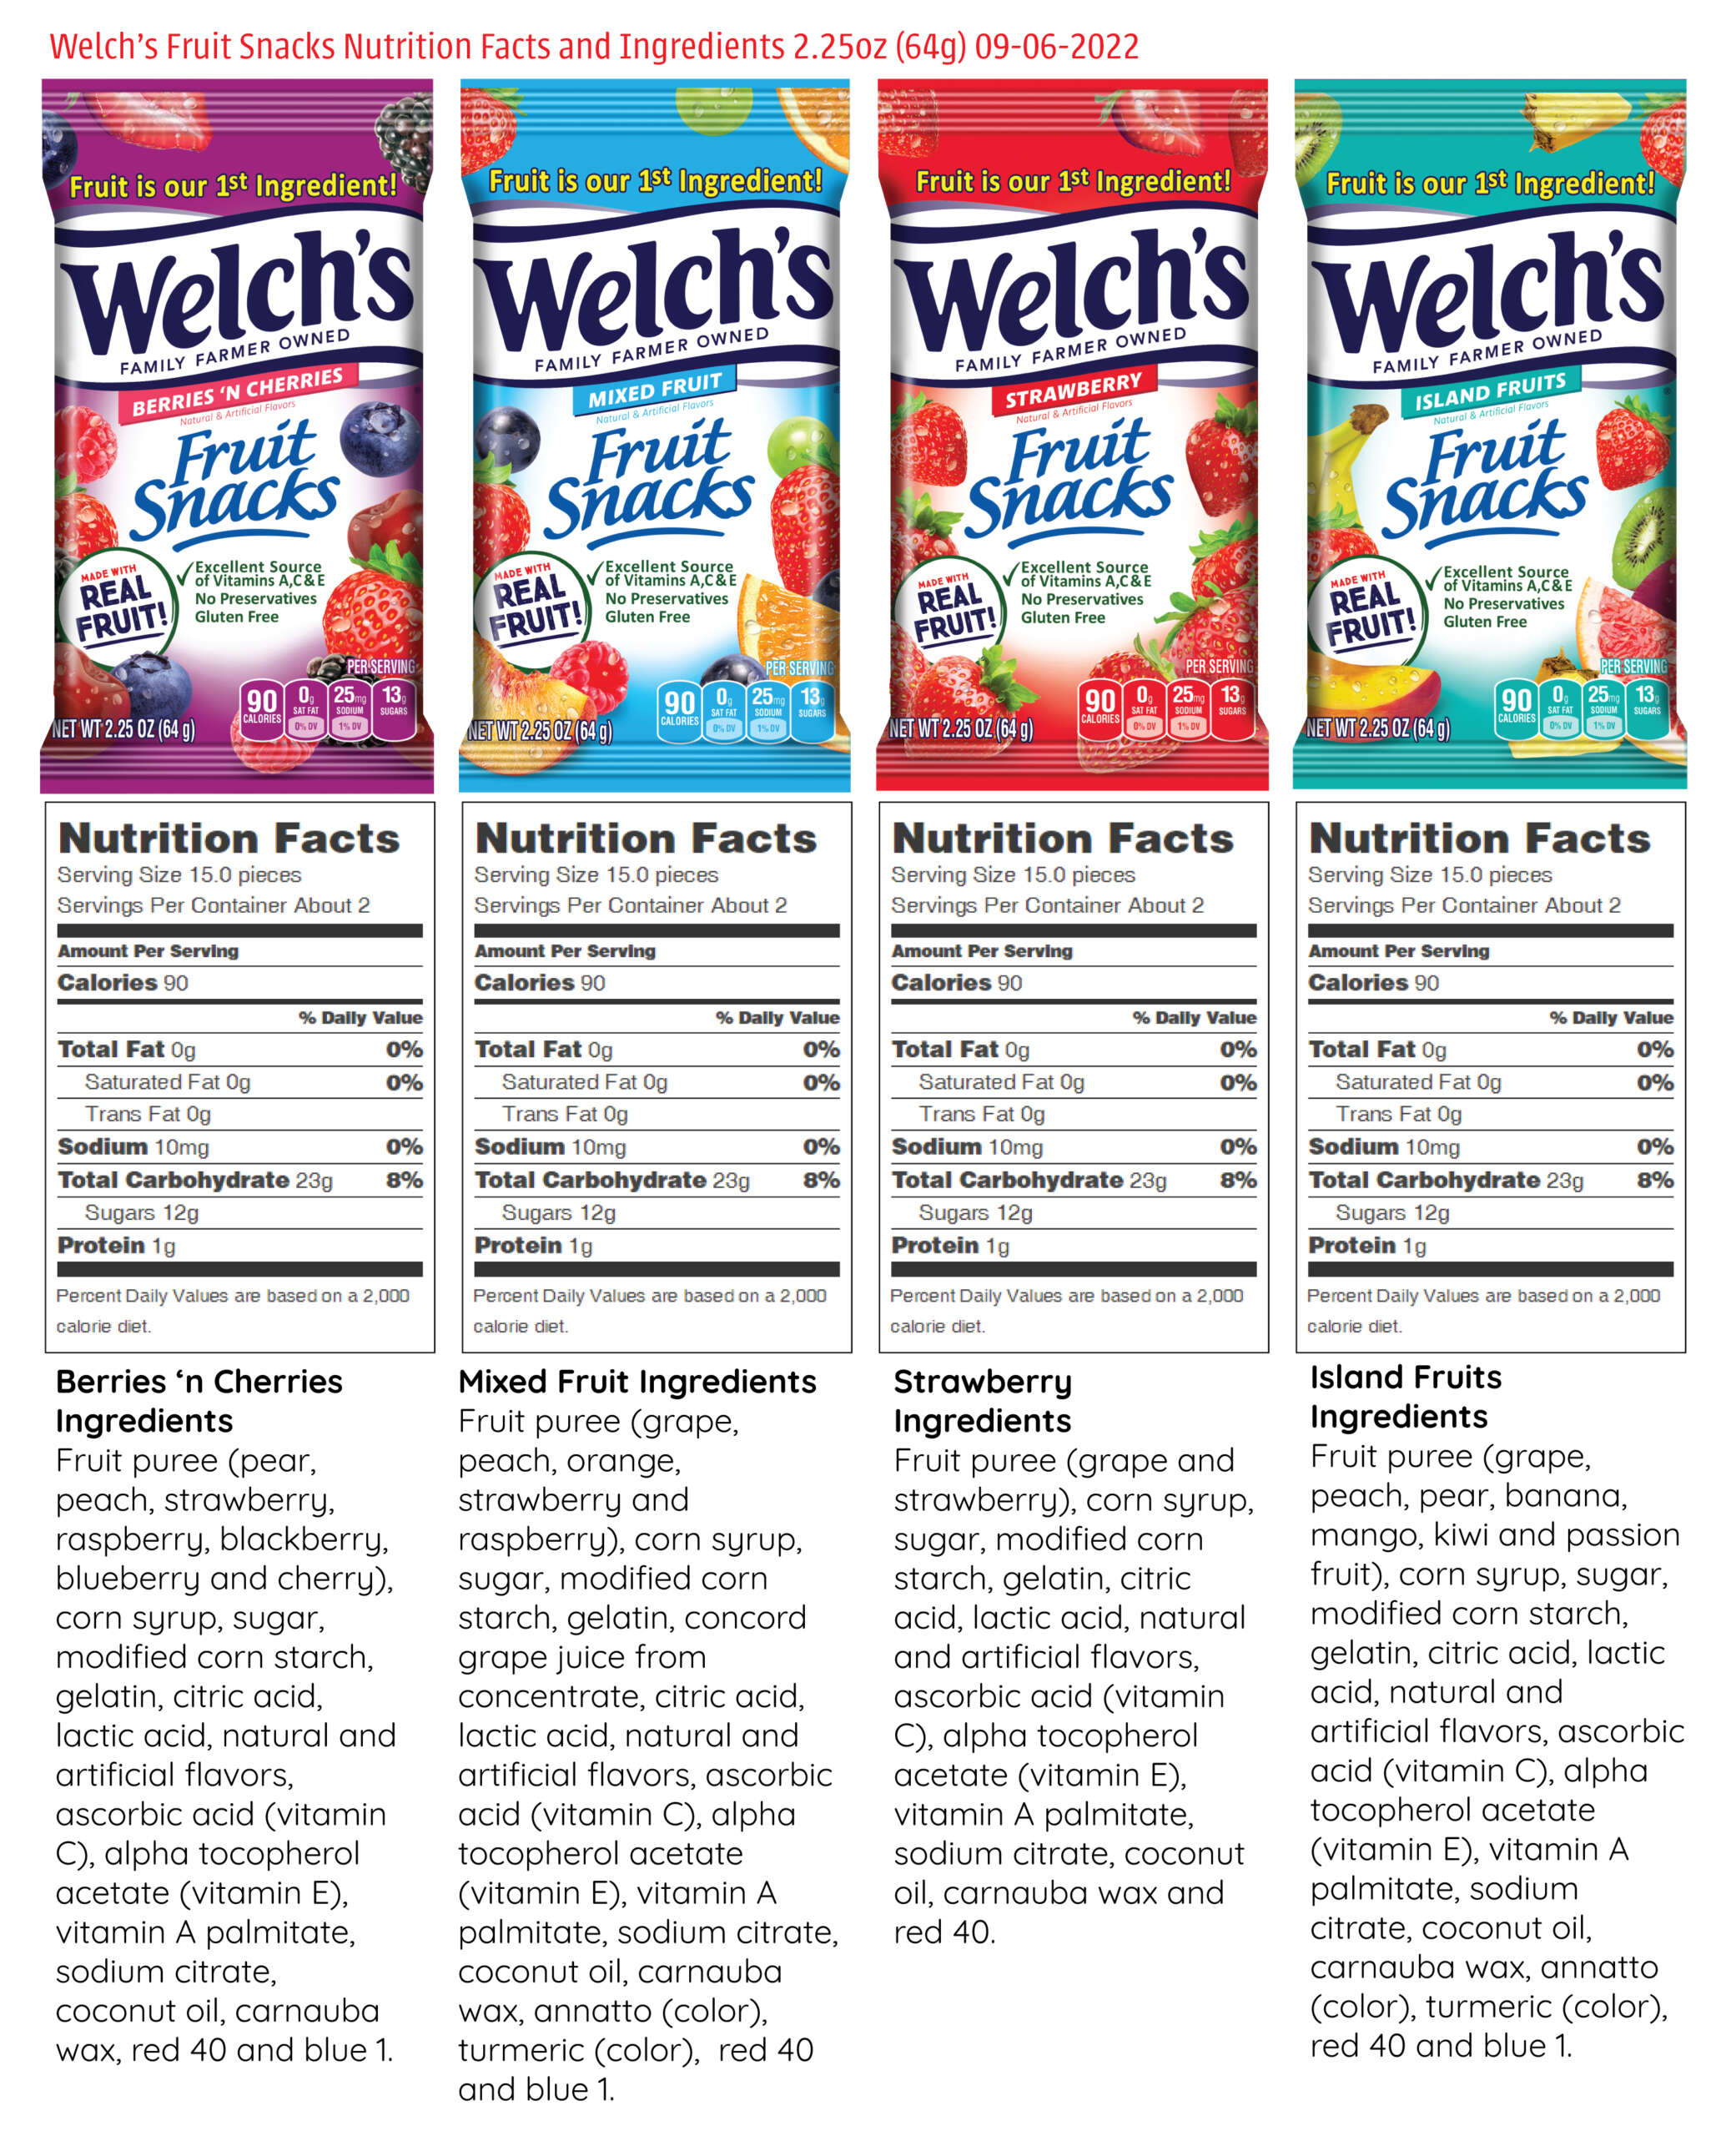 Welch's Nutrition Facts and Ingredients